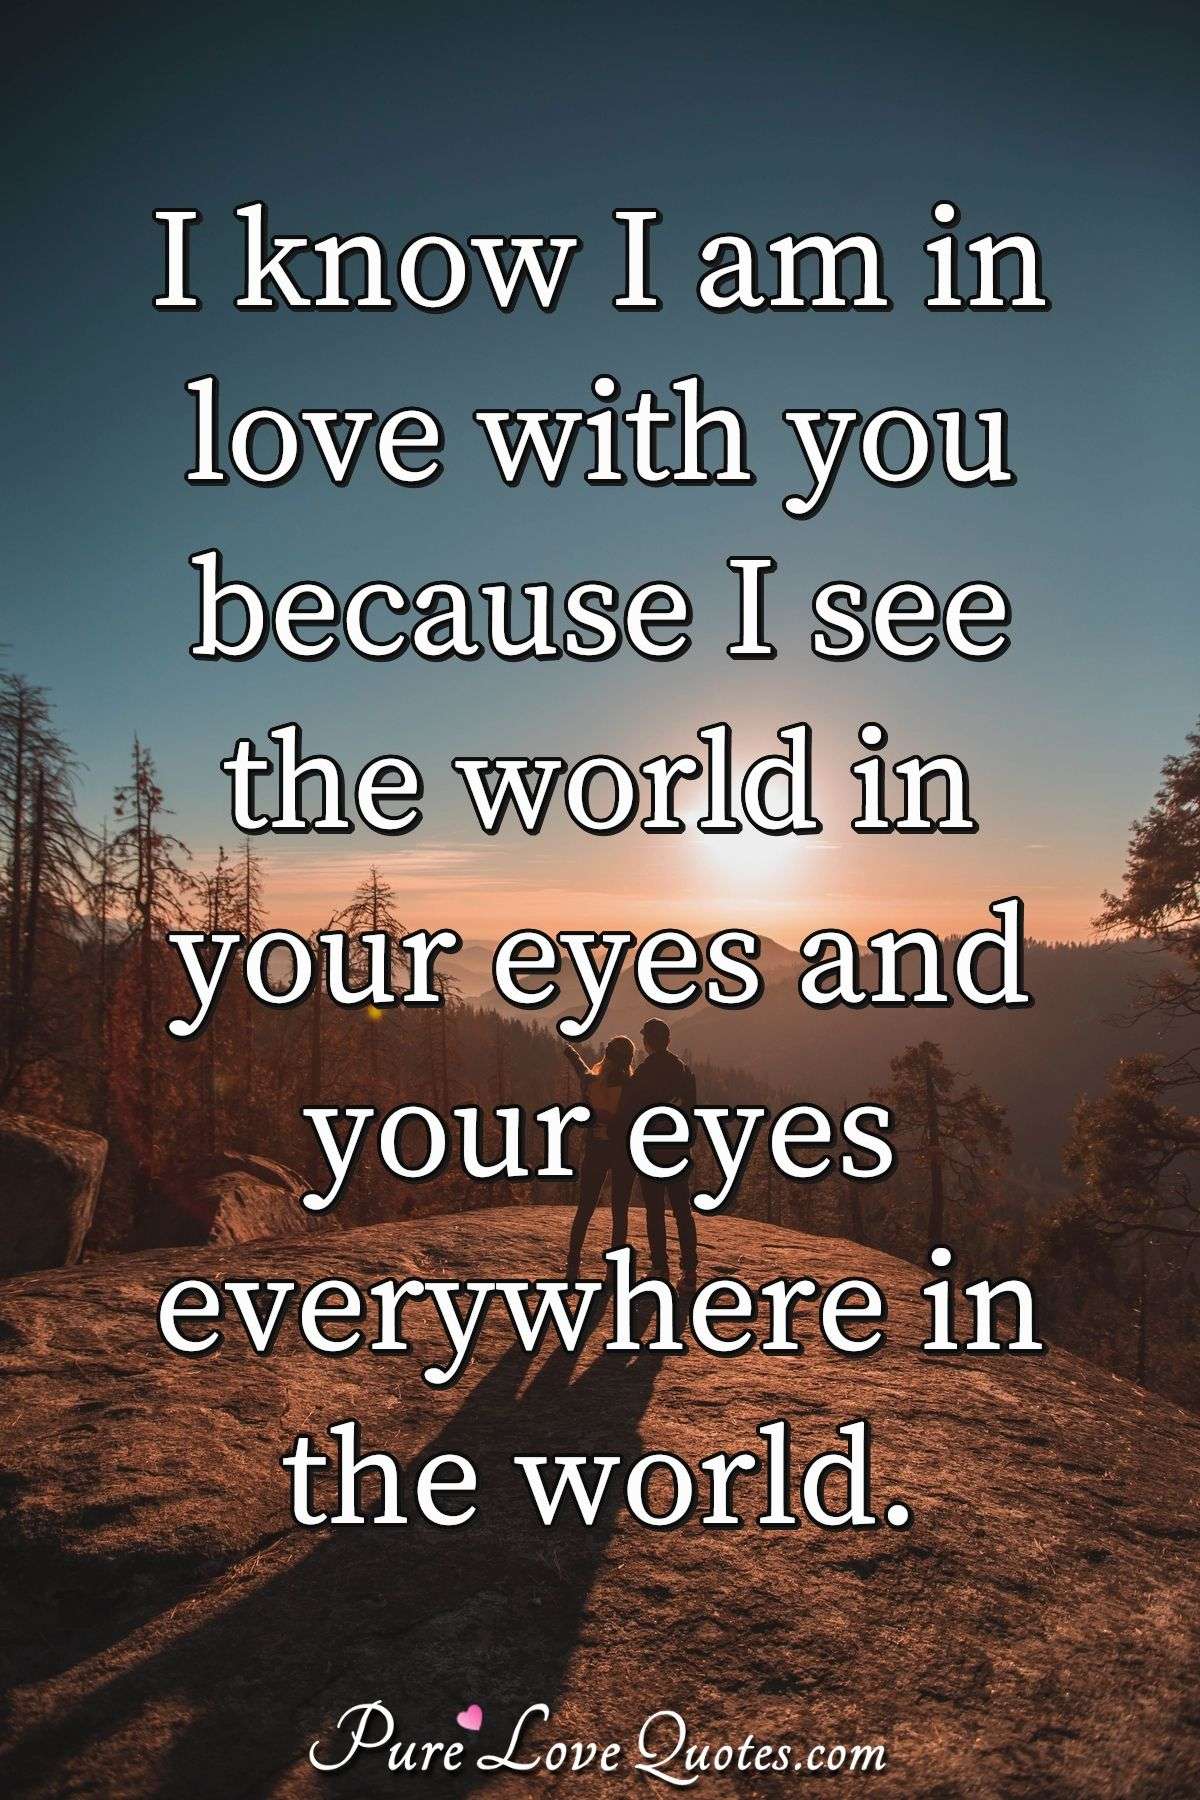 I know I am in love with you because I see the world in your eyes and your eyes everywhere in the world. - Anonymous